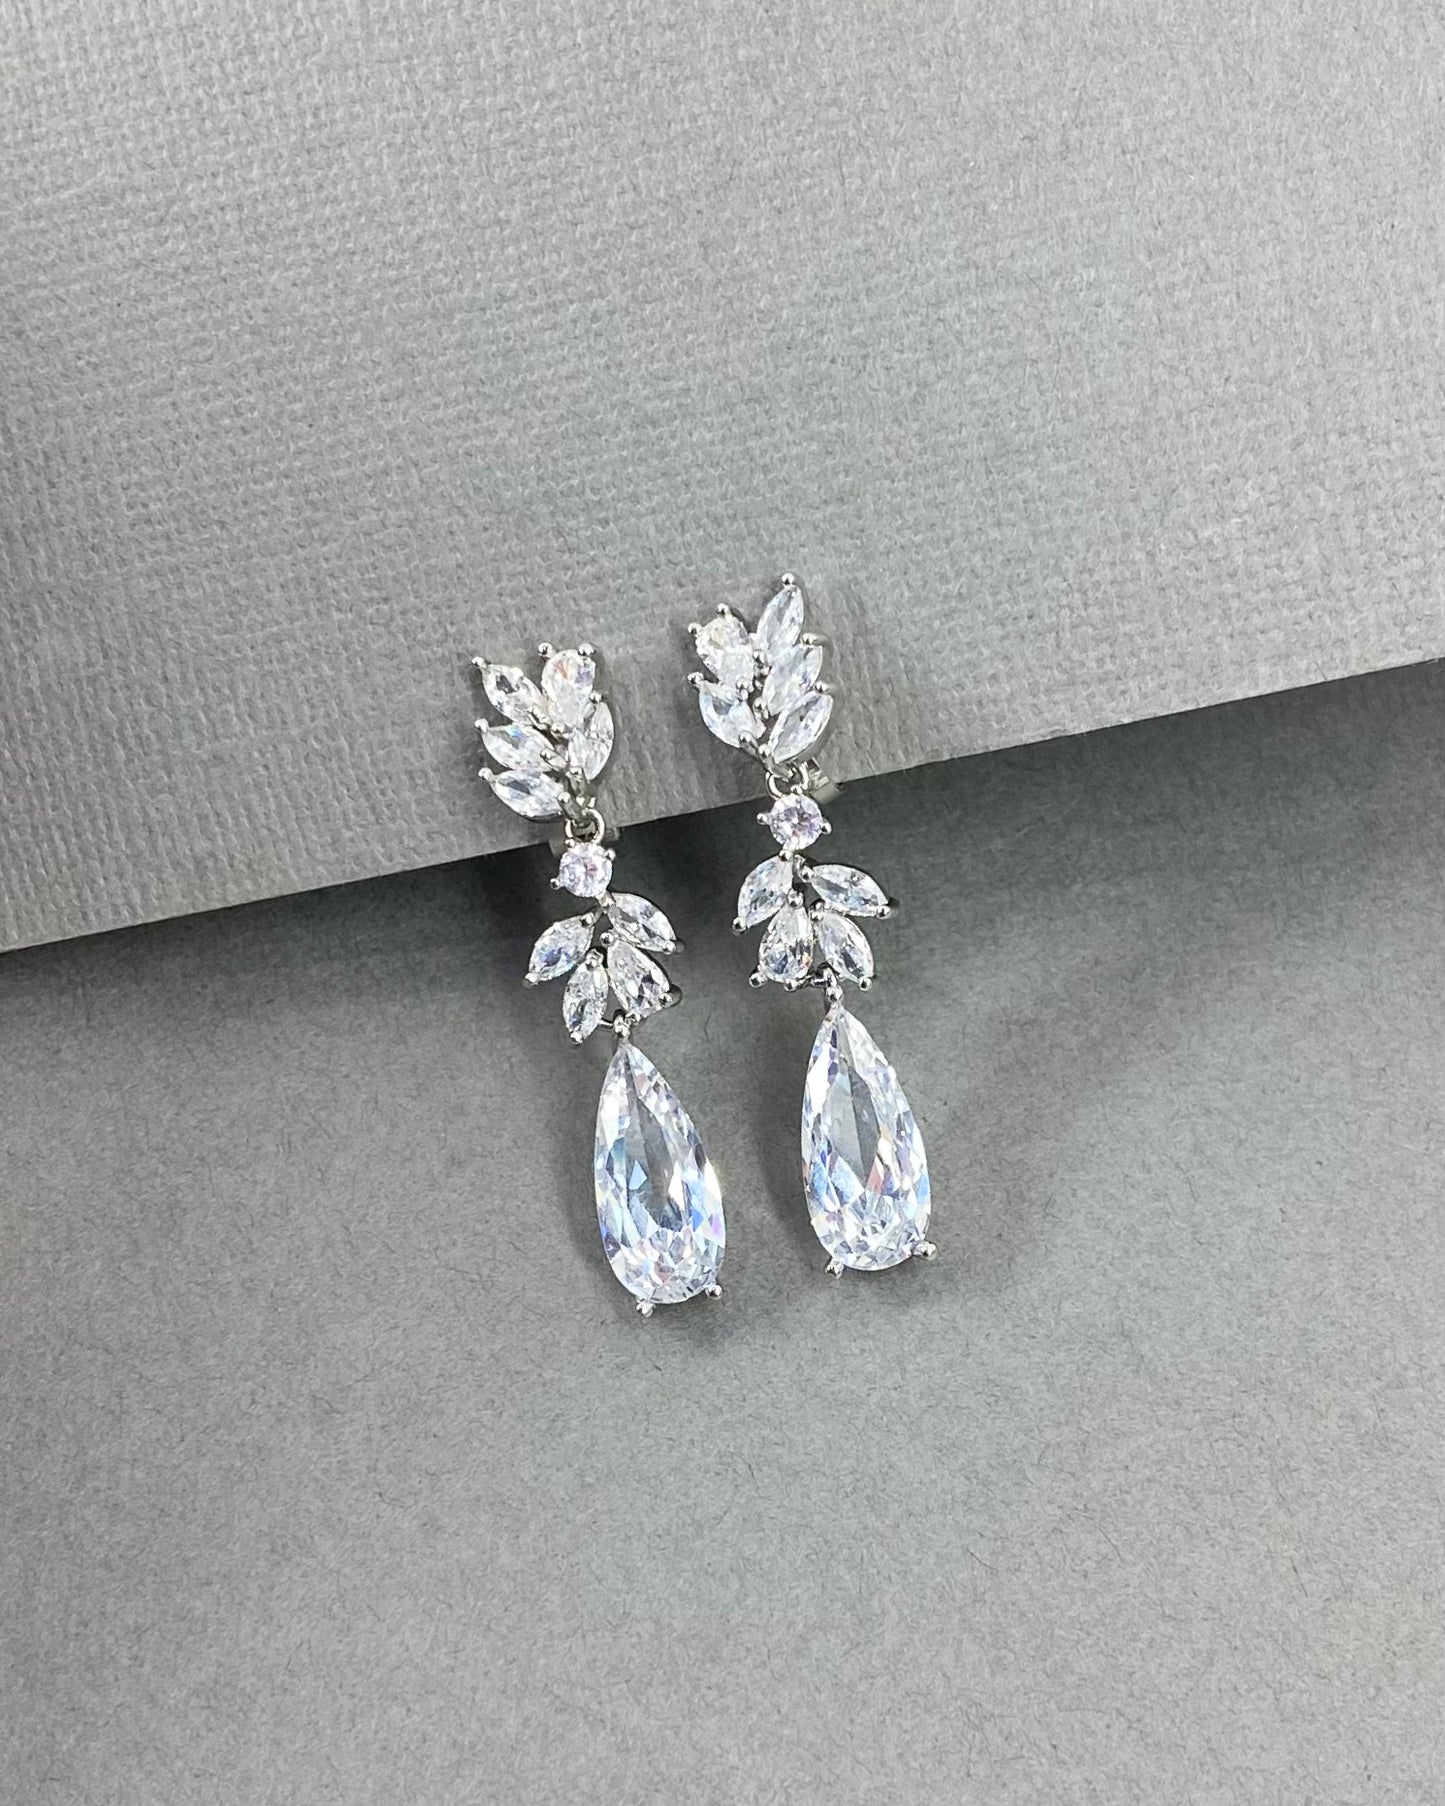 Lorelei 2pcs White Gold Plated CZ Necklace and Earrings Set